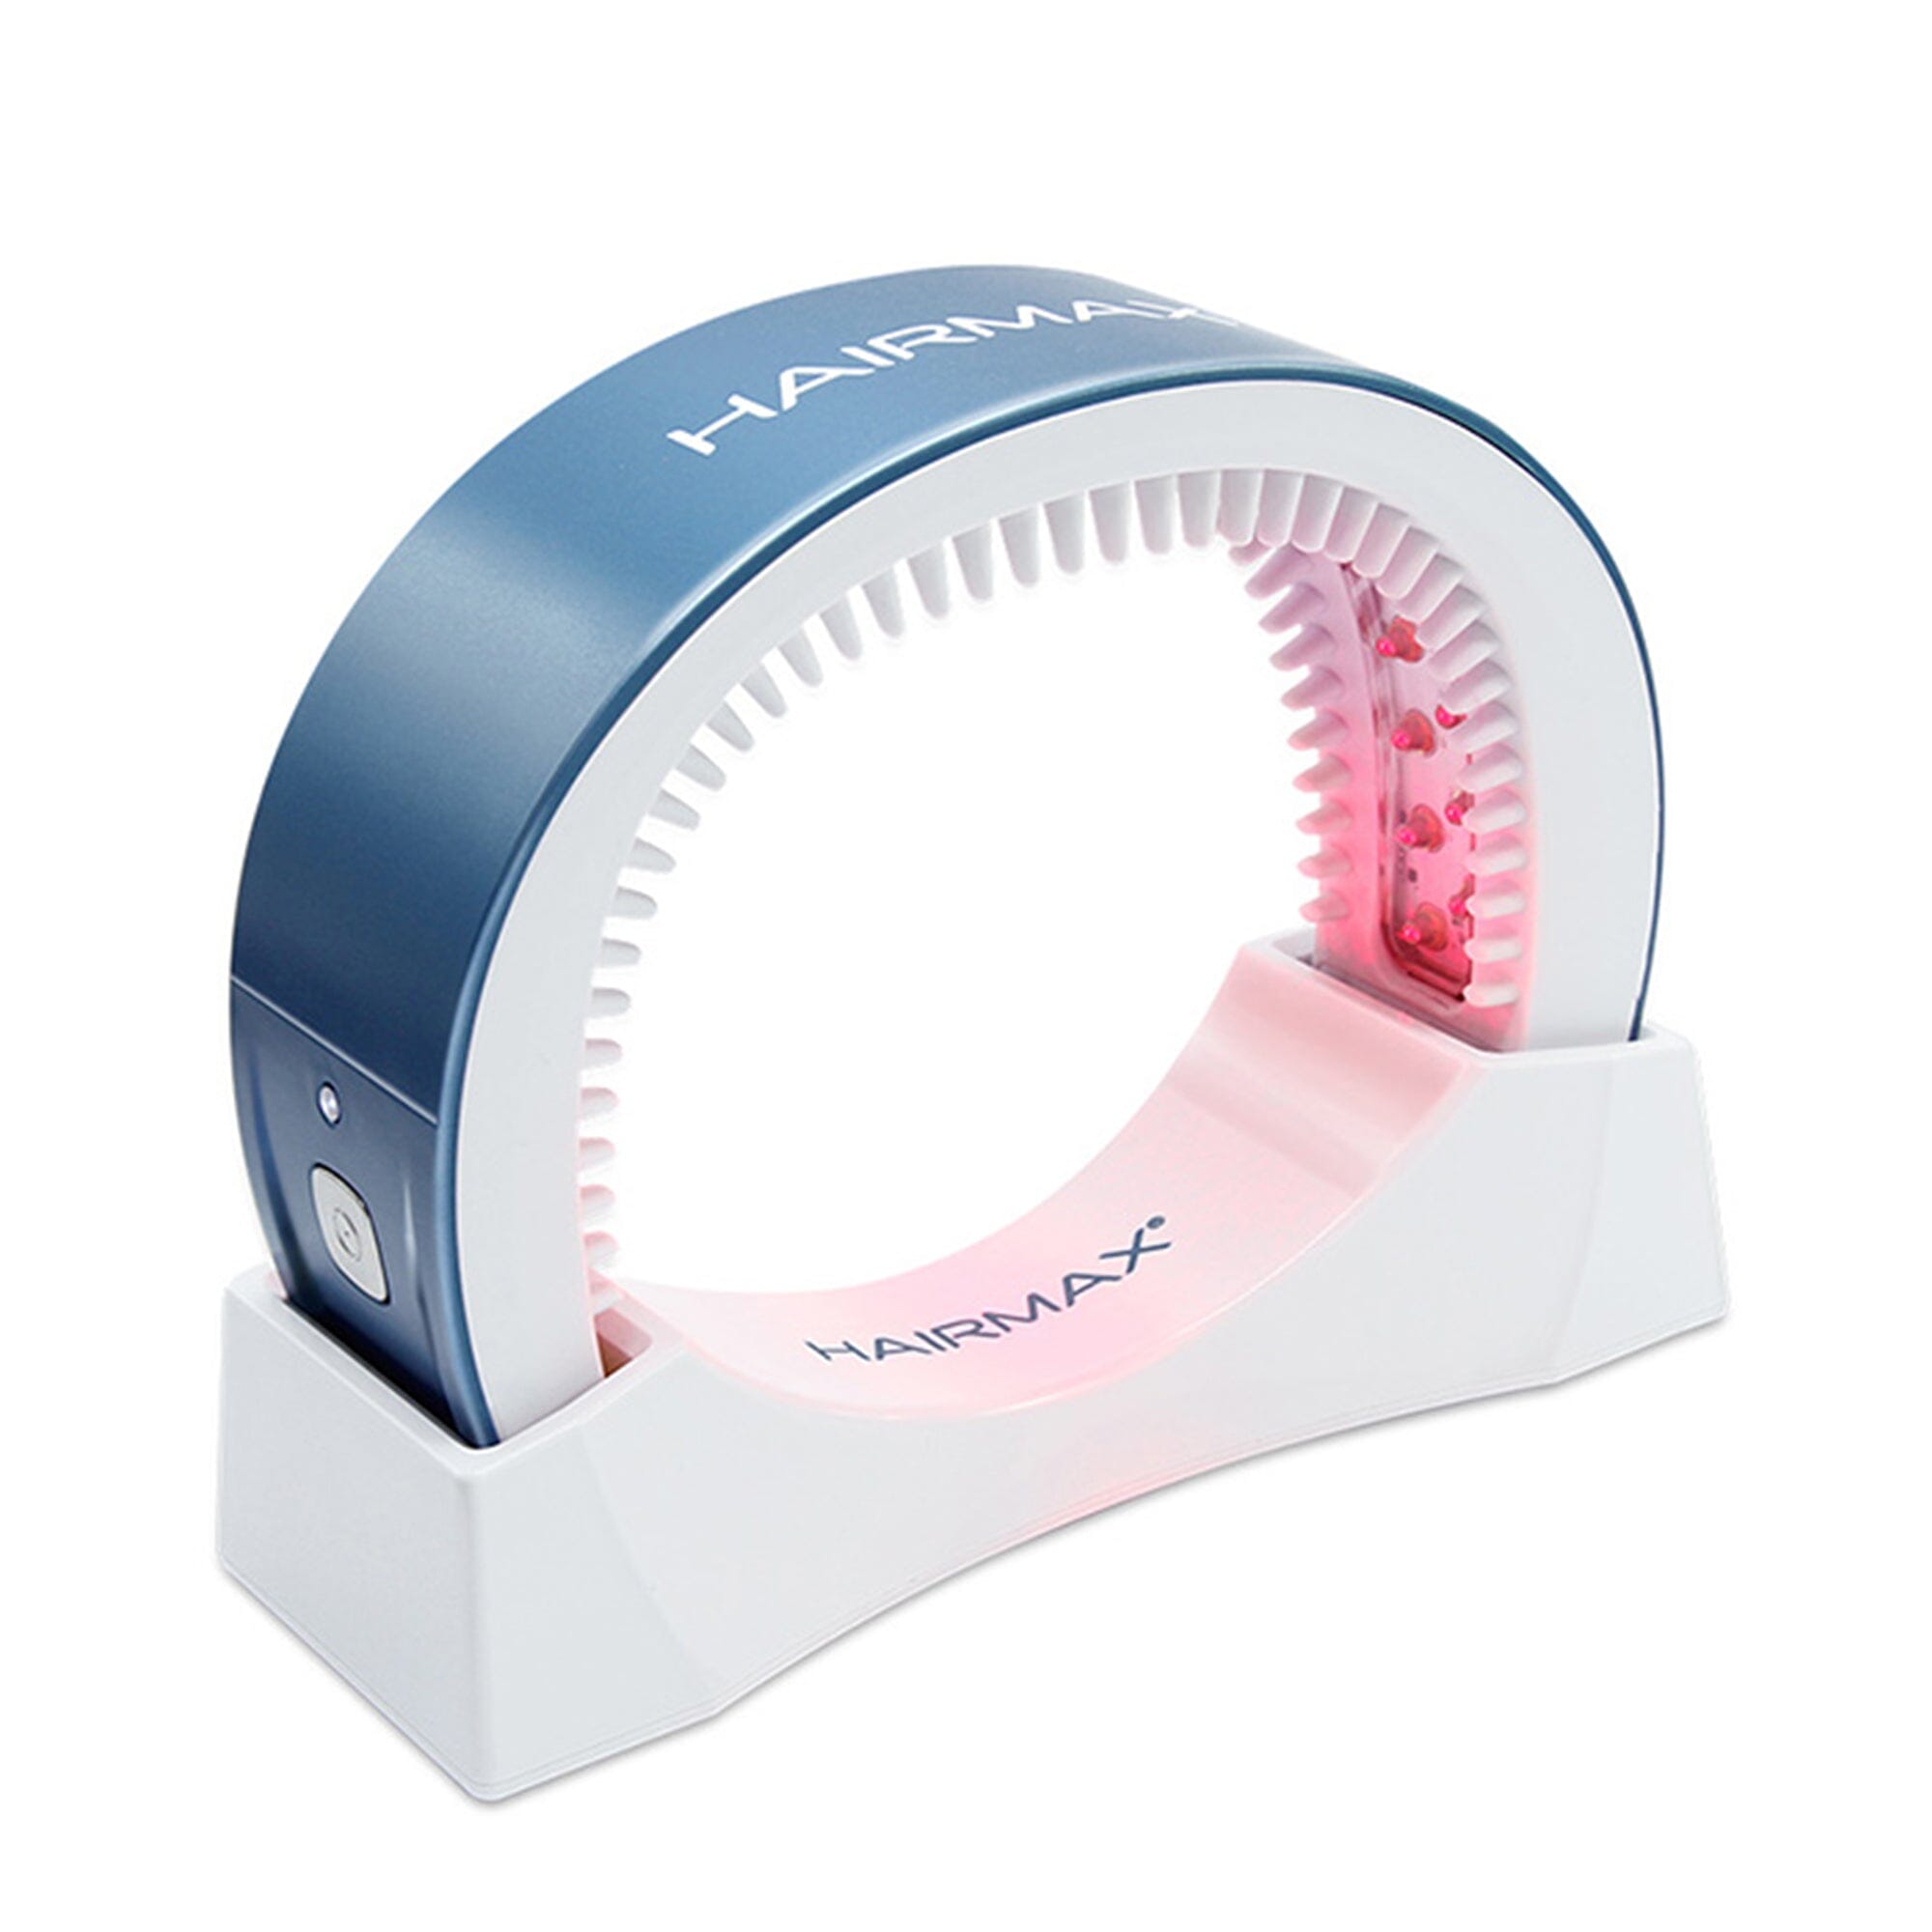 Hairmax Laser Band 41 - ComfortFlex Hair Growth Device Hairmax Shop at Exclusive Beauty Club